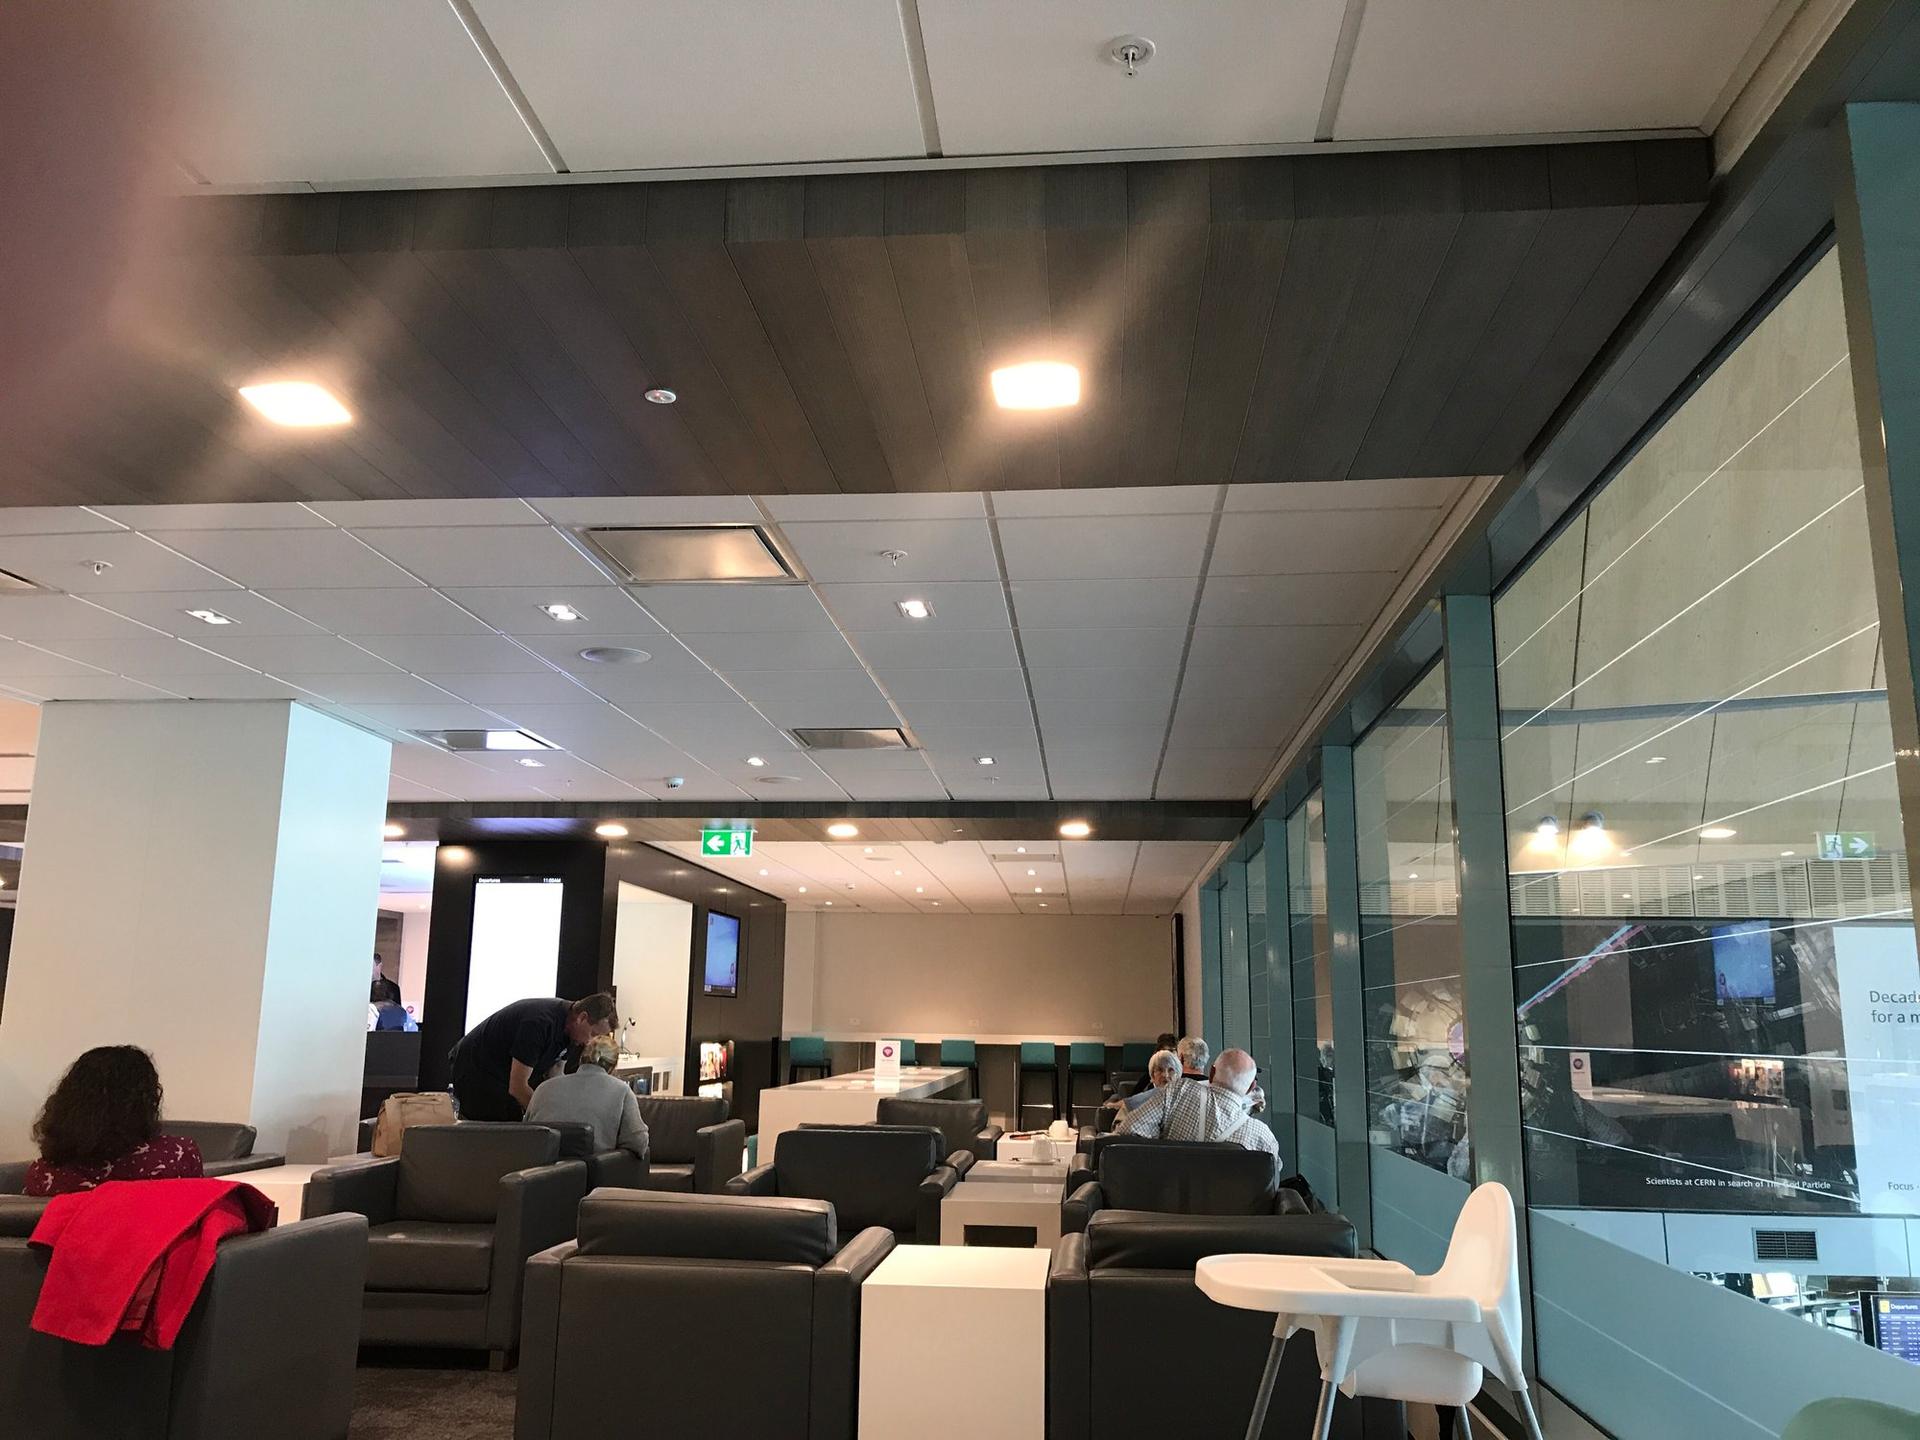 Air New Zealand Regional Lounge image 1 of 8